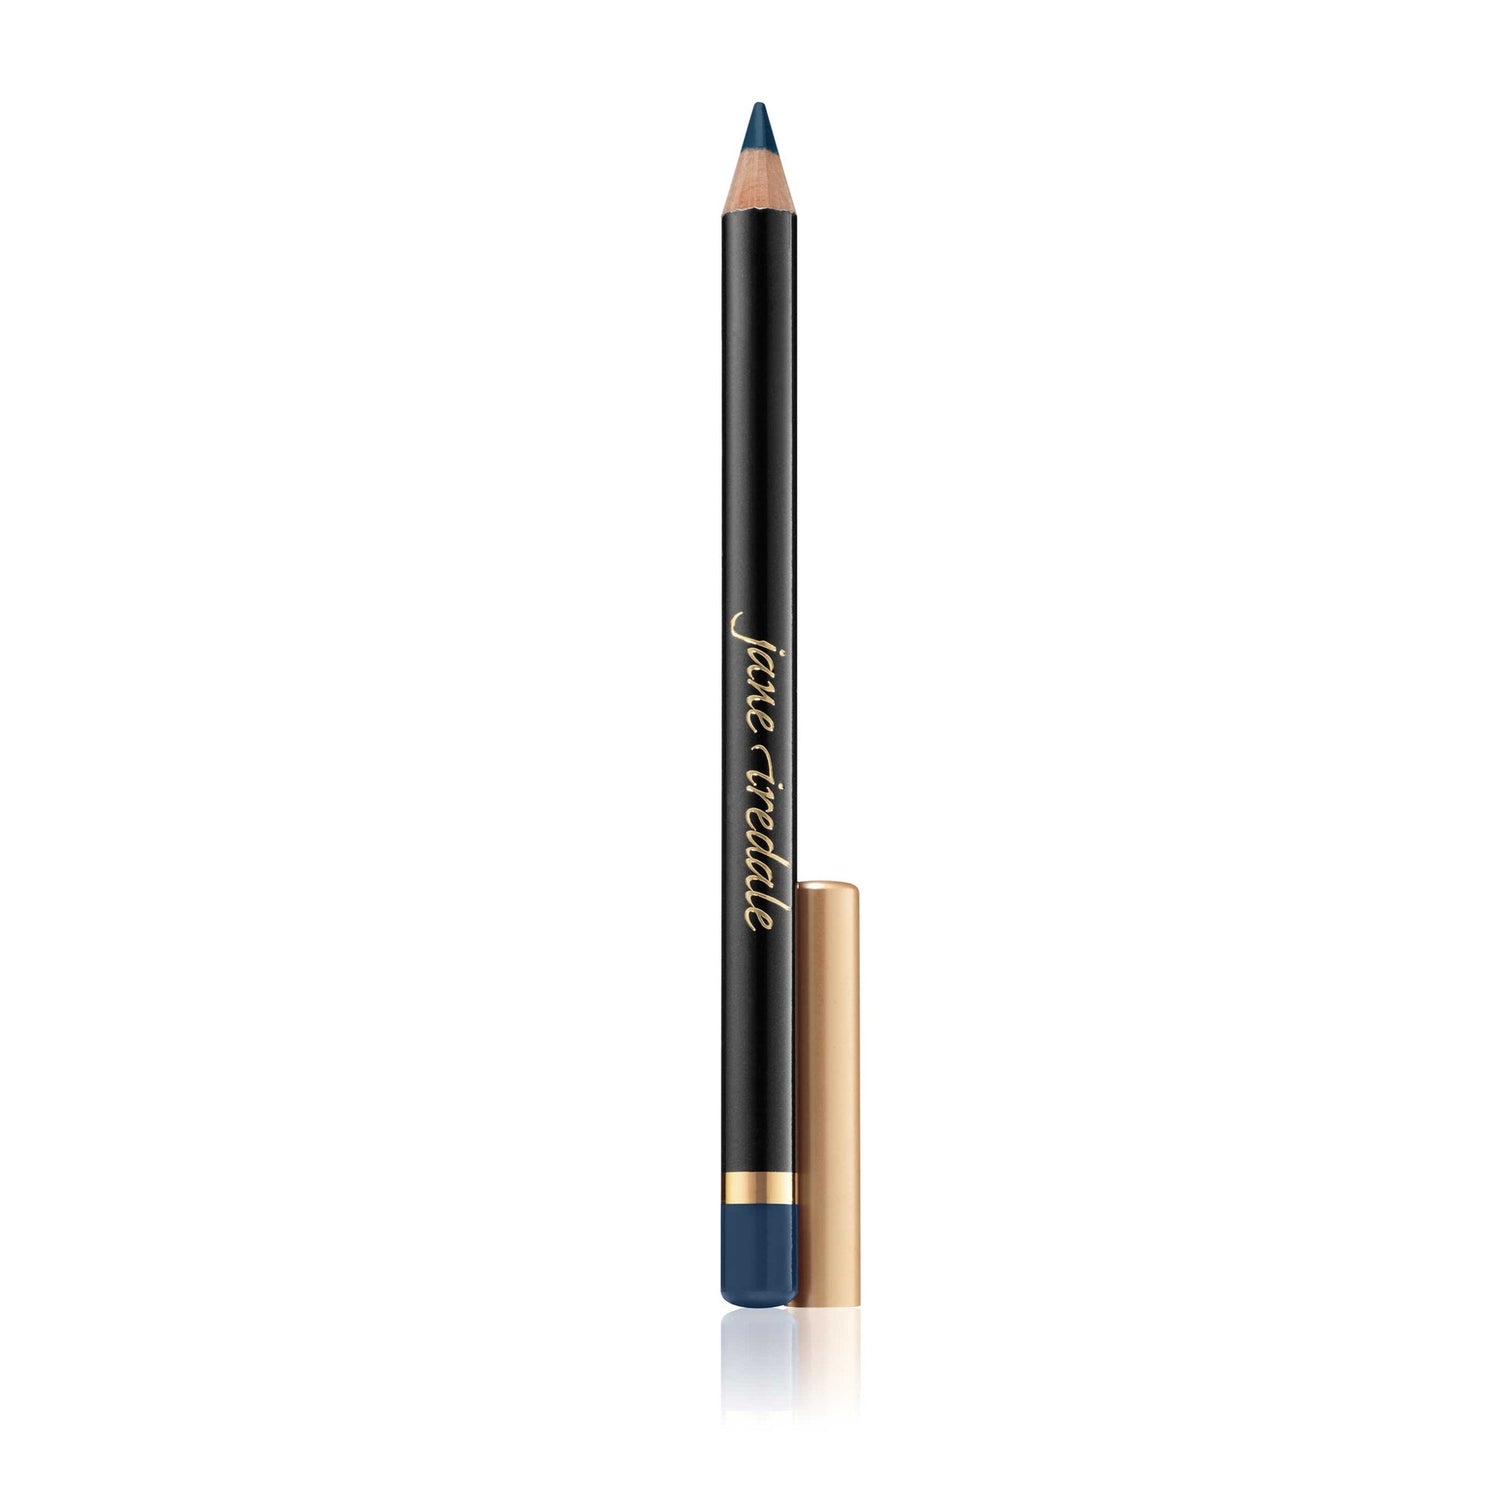 Jane Iredale Midnight Blue Eye Liner Pencil. Pencils so soft they won't pull on your delicate skin. Natural pigments give you long-lasting color that stays put.